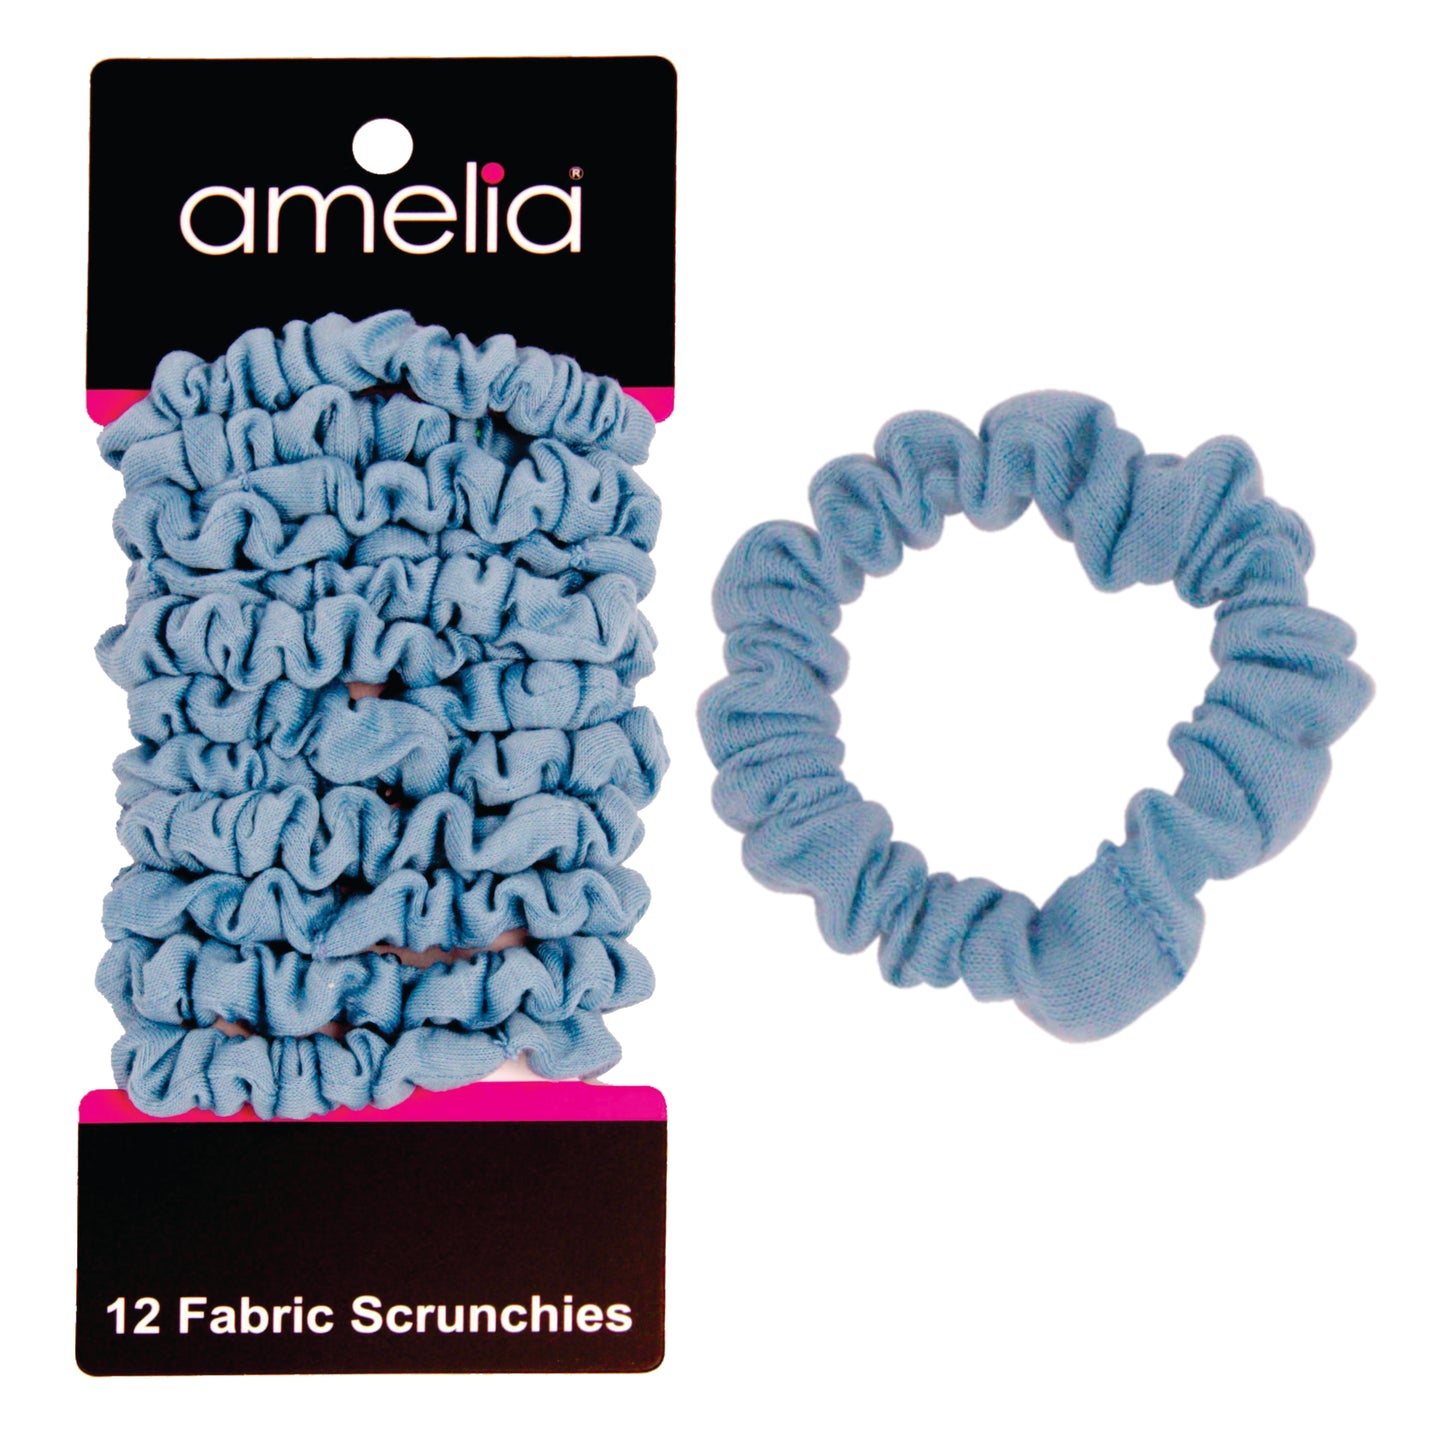 Amelia Beauty, Sky Jersey Scrunchies, 2.25in Diameter, Gentle on Hair, Strong Hold, No Snag, No Dents or Creases. 12 Pack